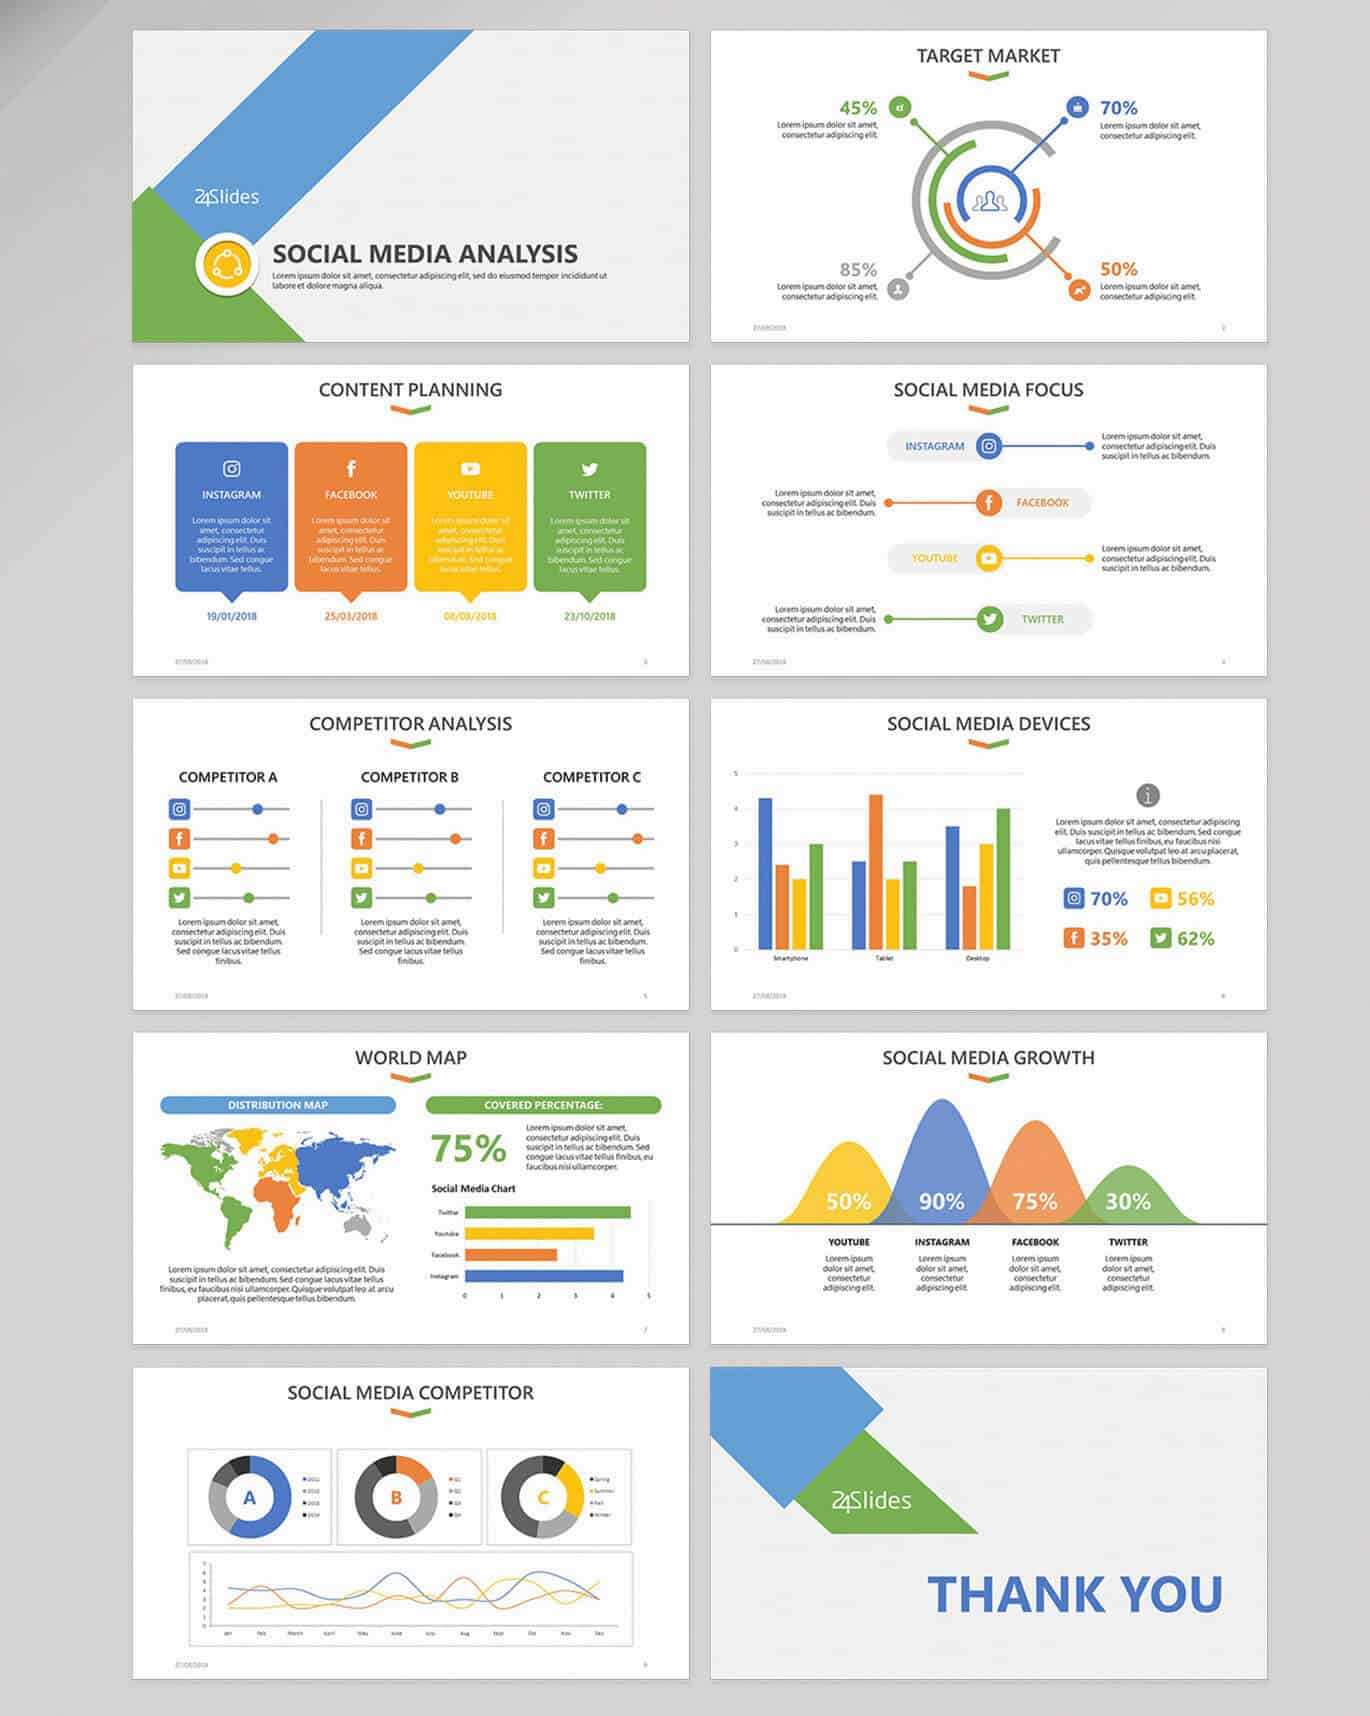 Slide Template In Powerpoint Business Edit 2013 2010 Free Inside Change Template In Powerpoint